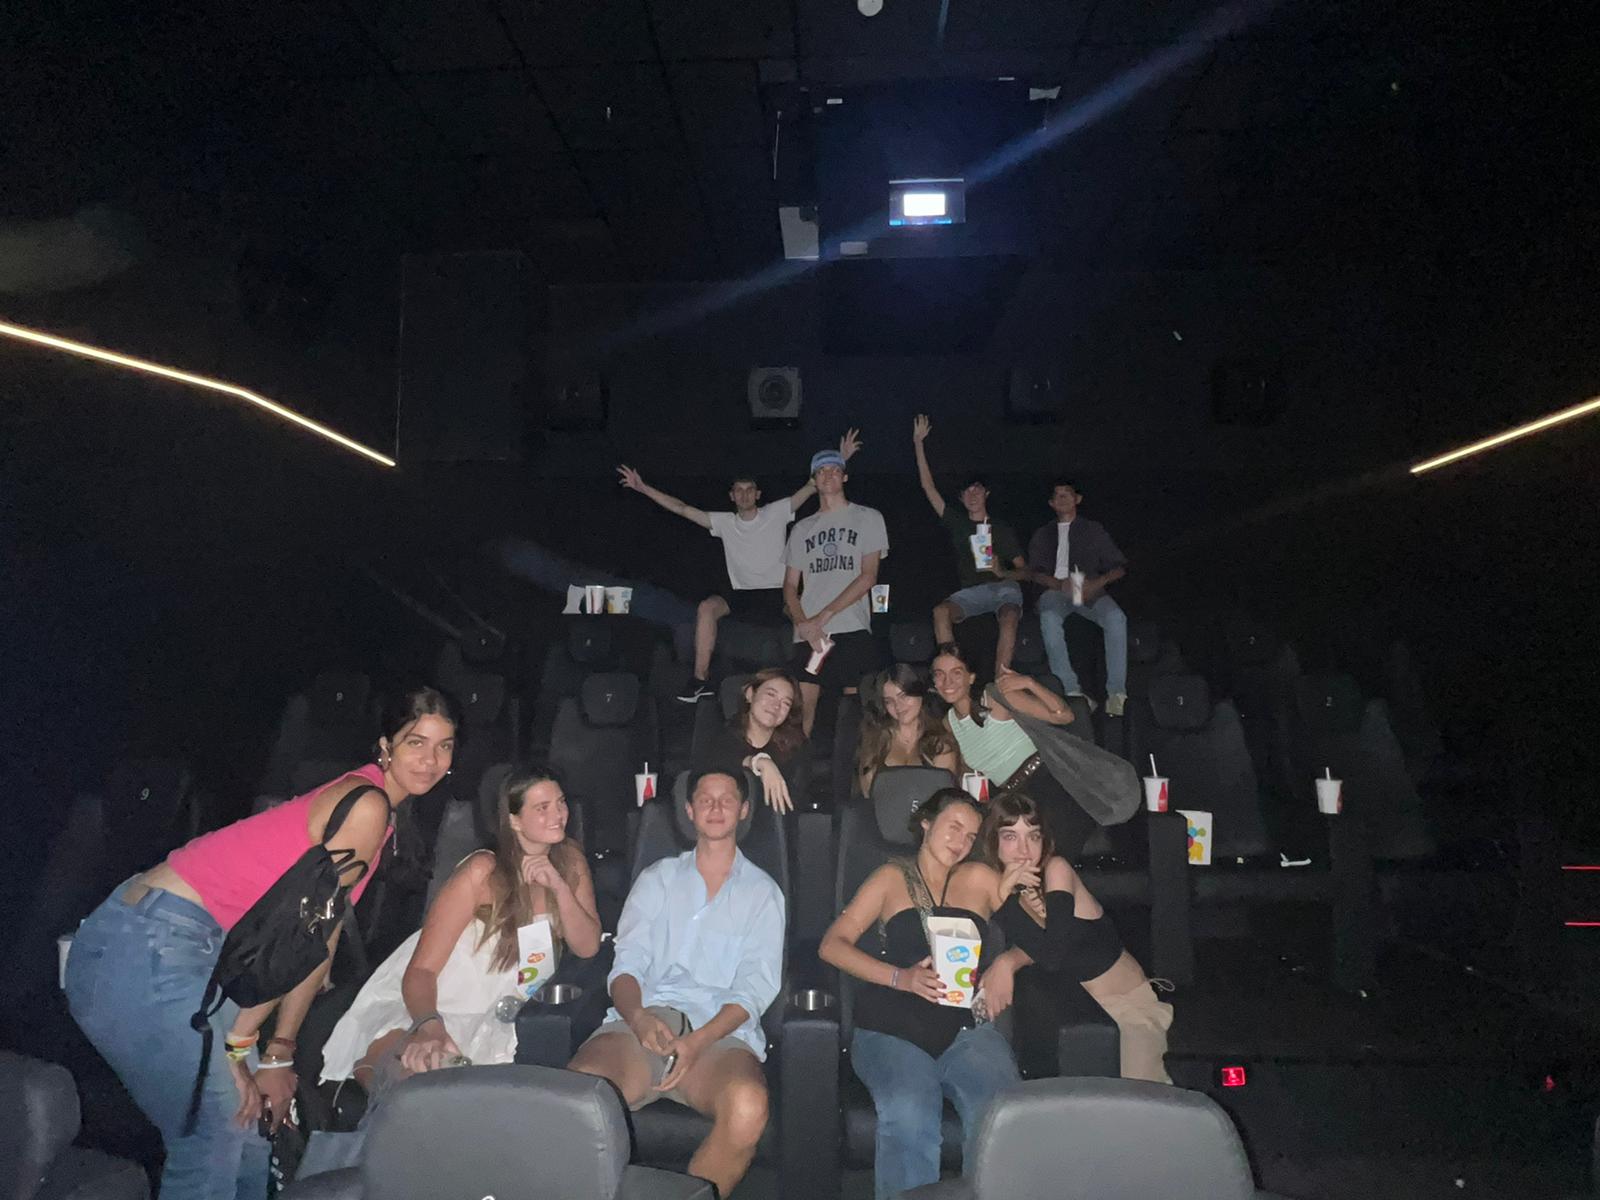 Alandis students from Choate Rosemary Hall together with their exchange partners attend the cinema in Seville, Fall 2023